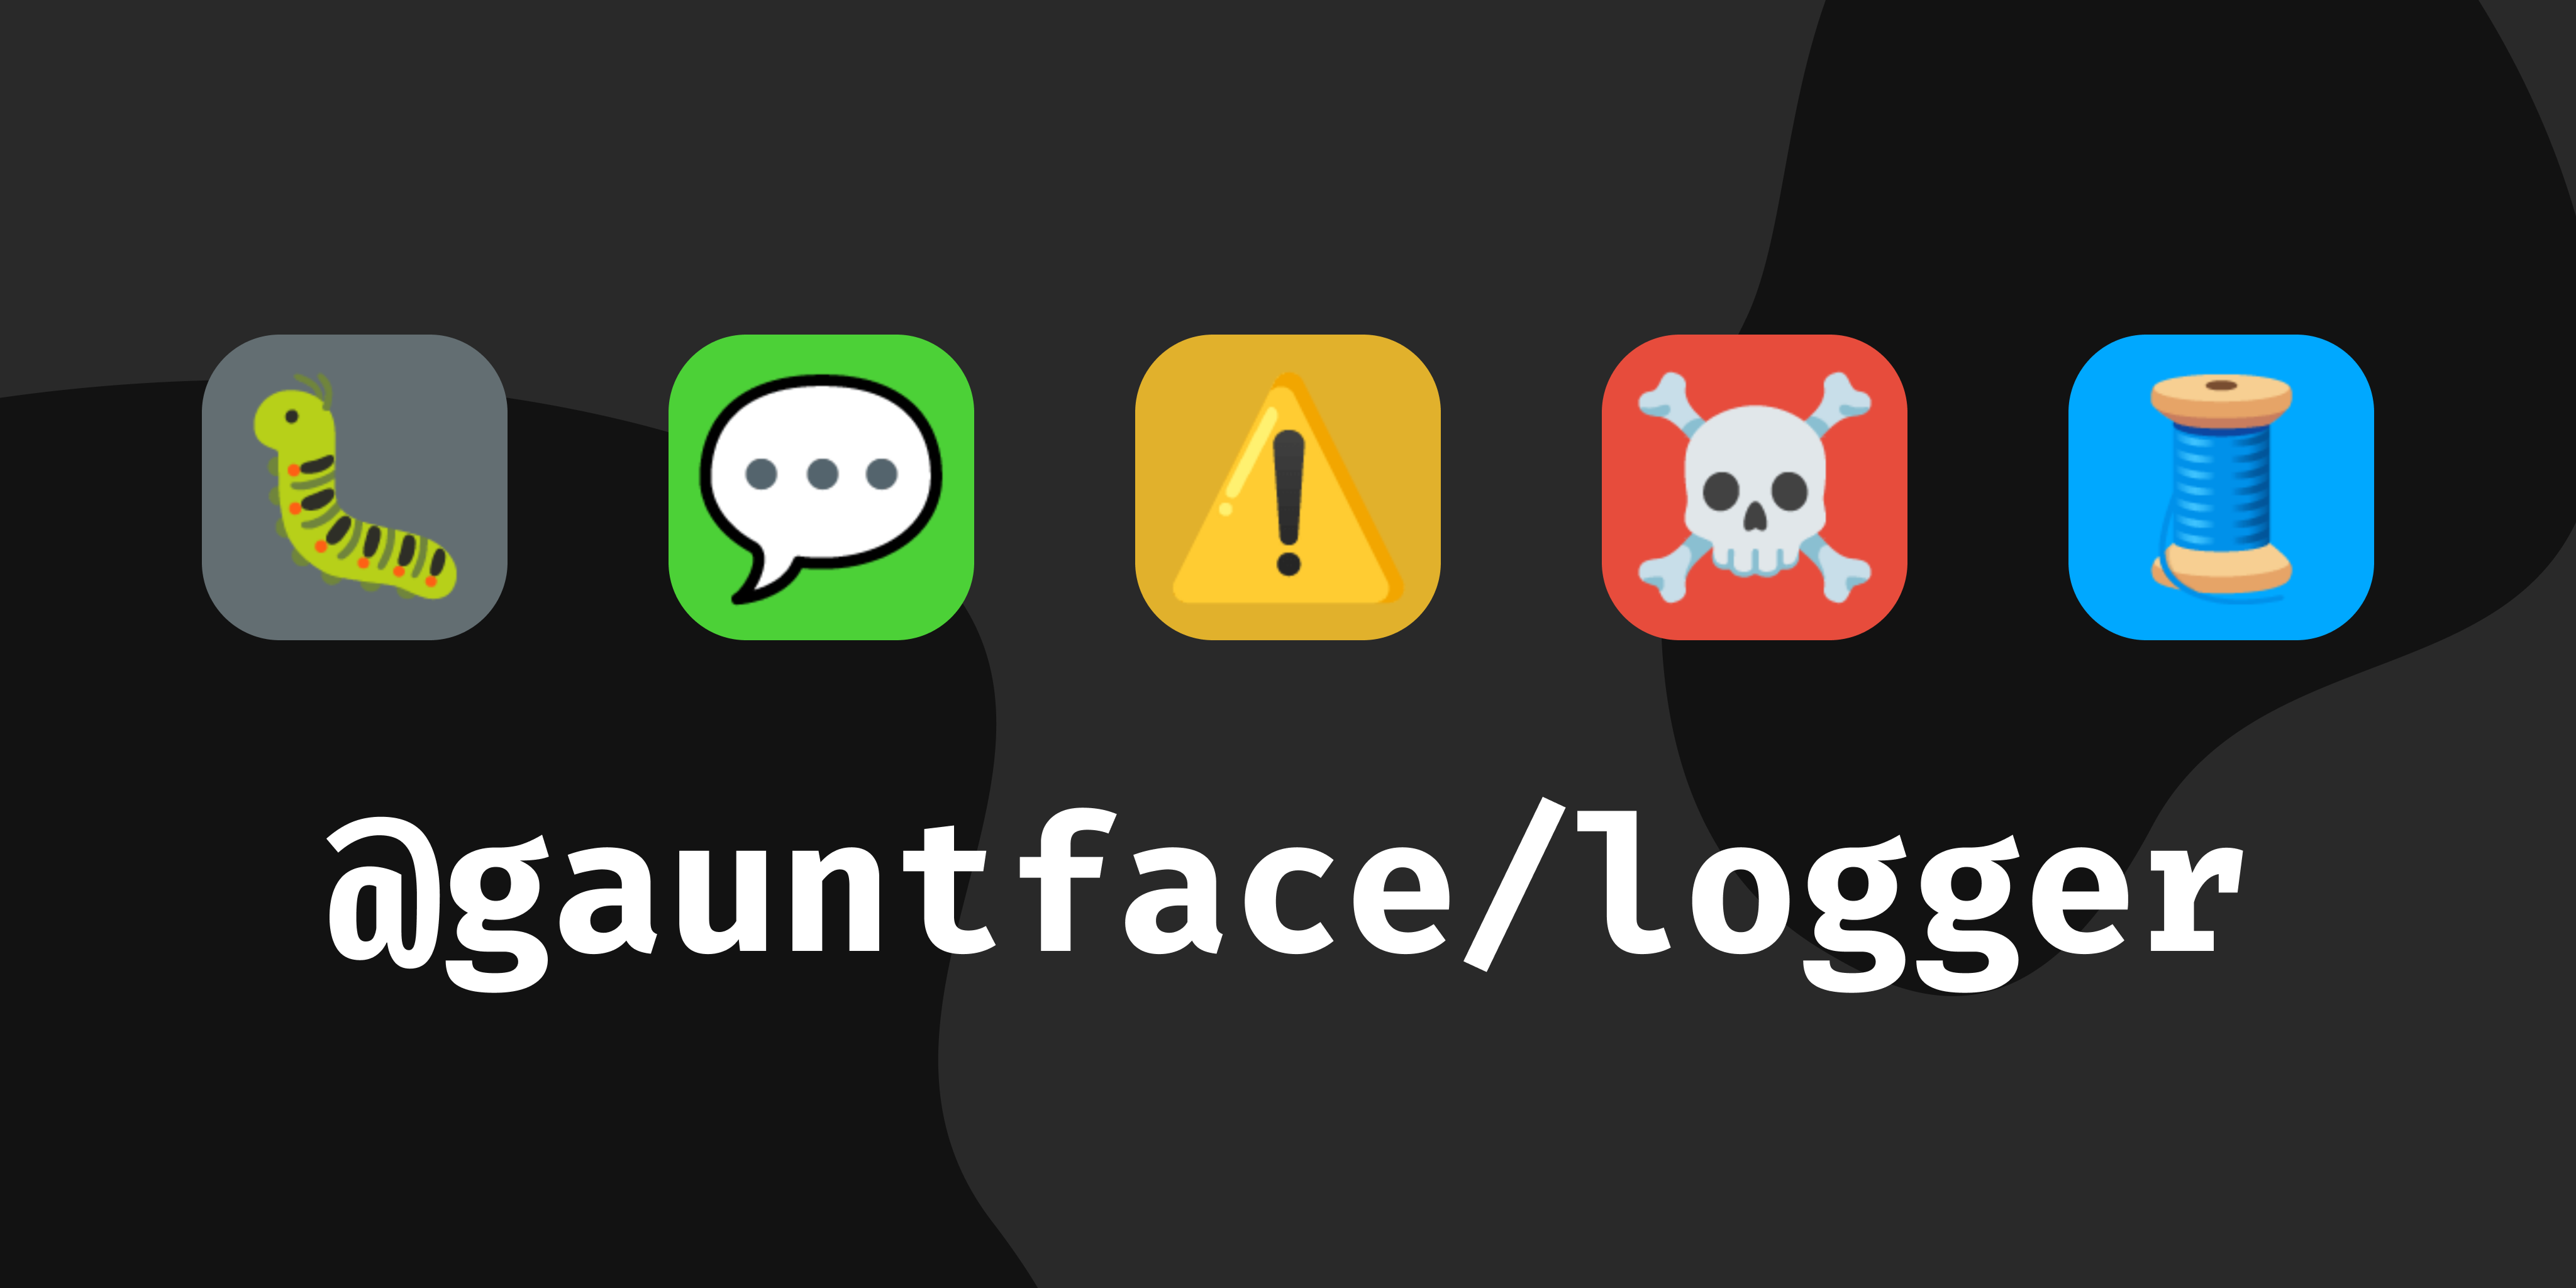 Image of the default emoji used by the logger